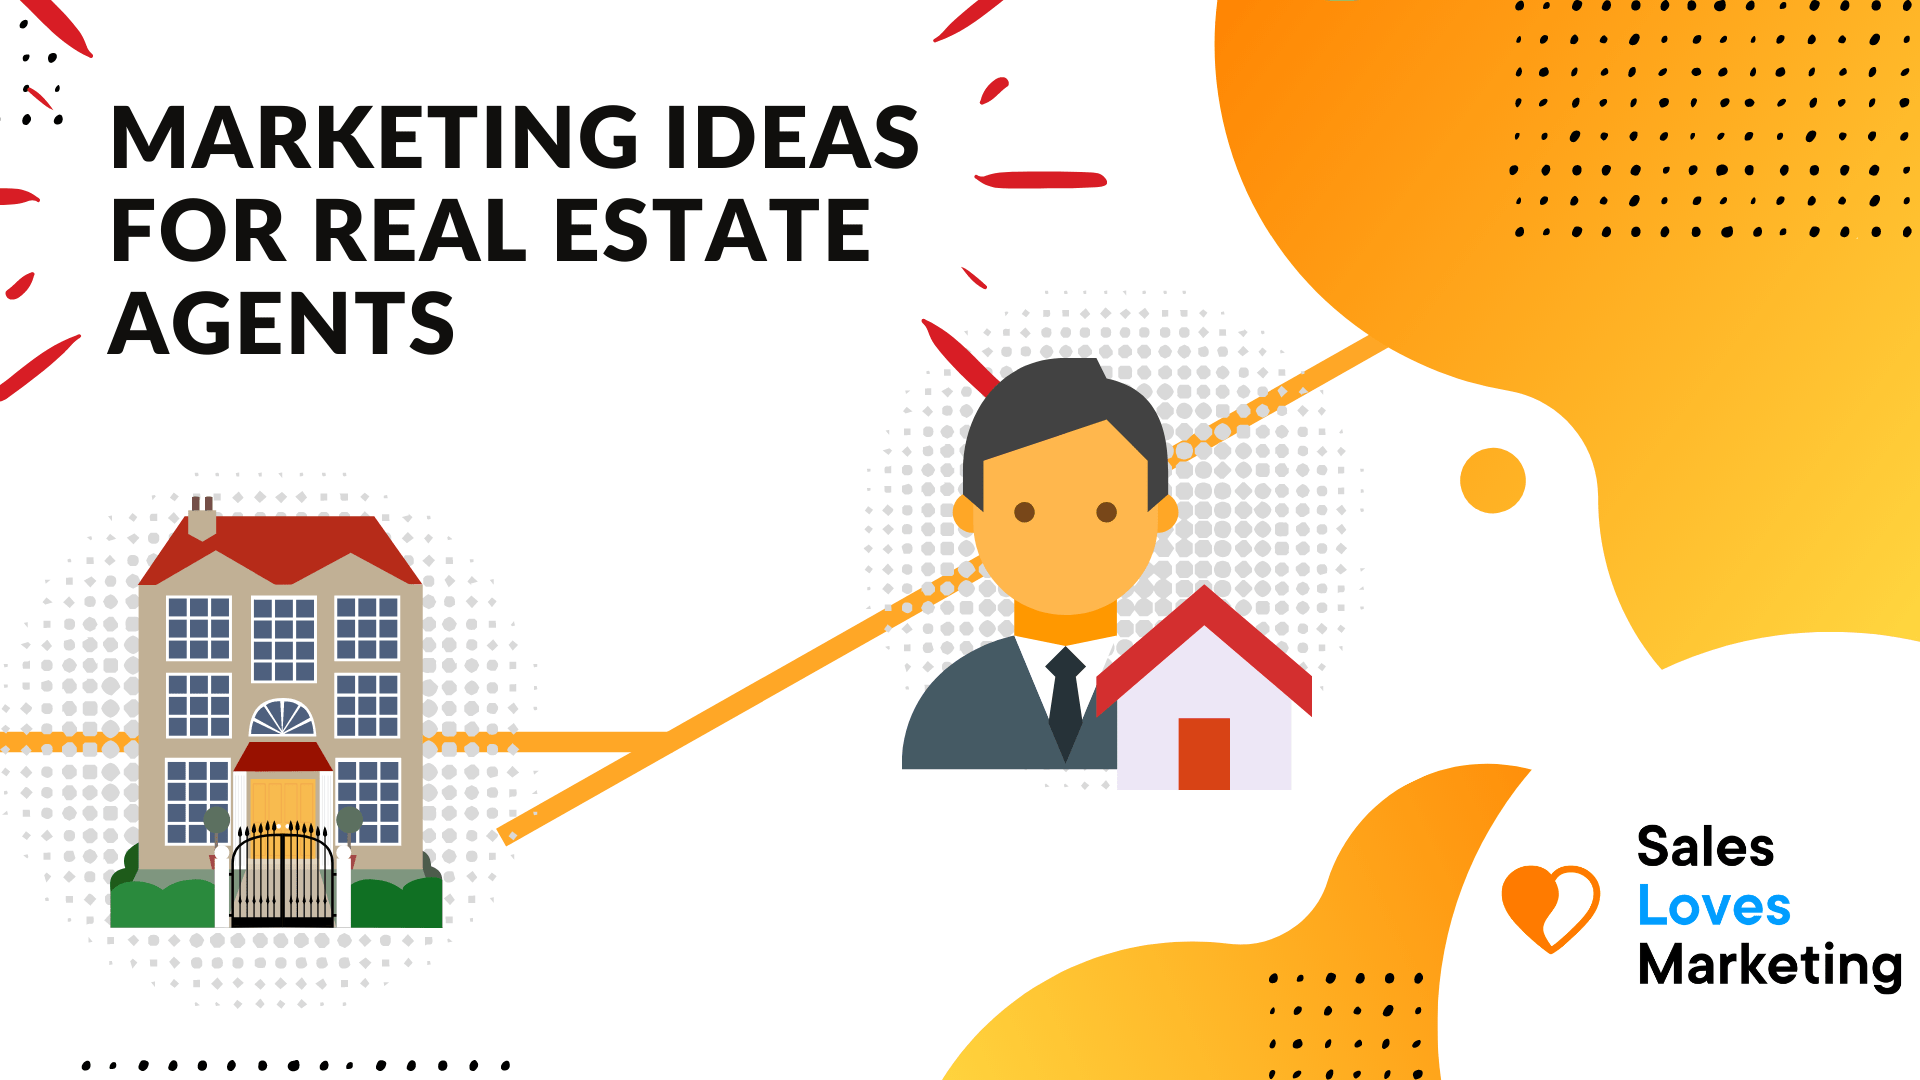 4 Real Estate Marketing Trends To Watch Out In 2019 - Become a local leader